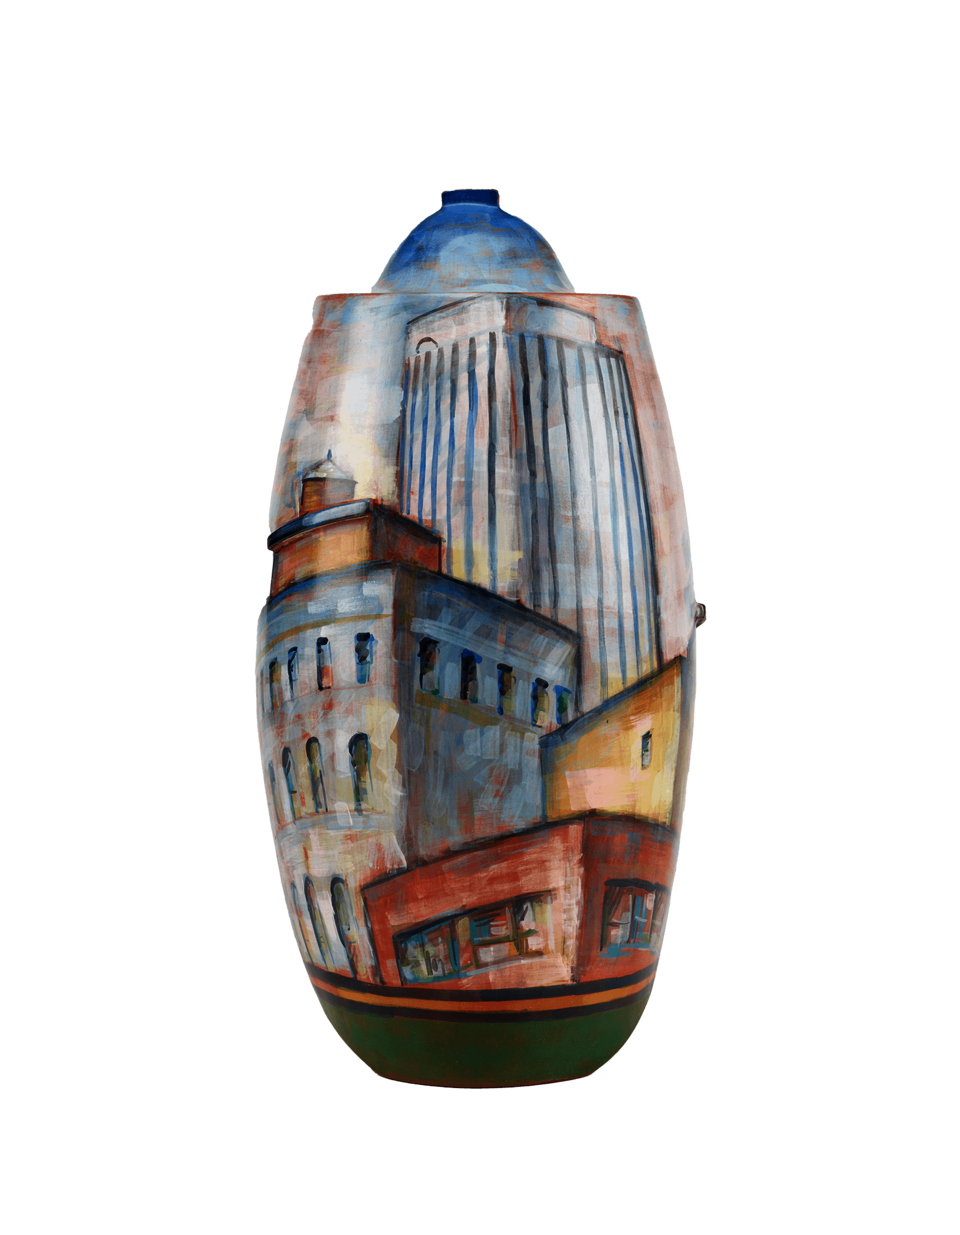 Tall vessel with painted images of modern buildings. A small, blue-painted domed form on top.